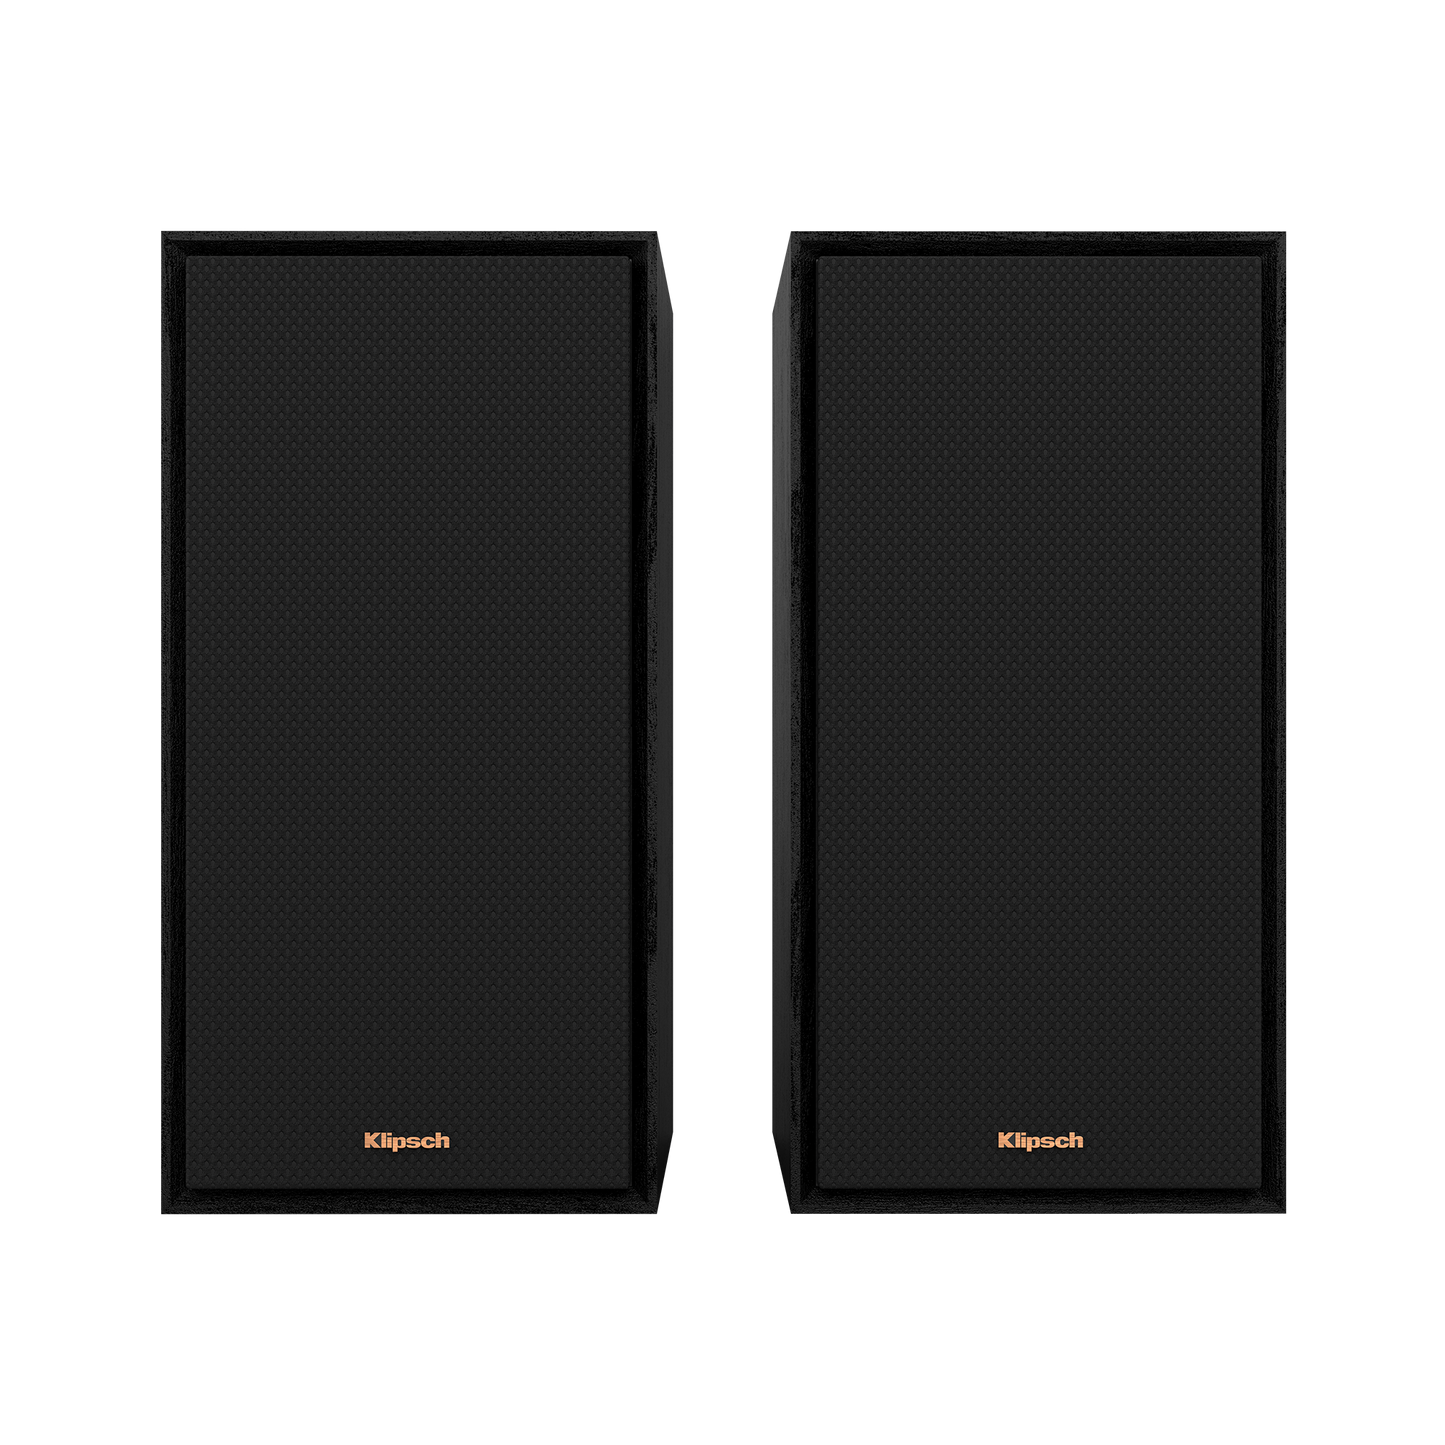 Klipsch R-50PM Powered Speakers with 5.25" Woofers. Black with grille, front